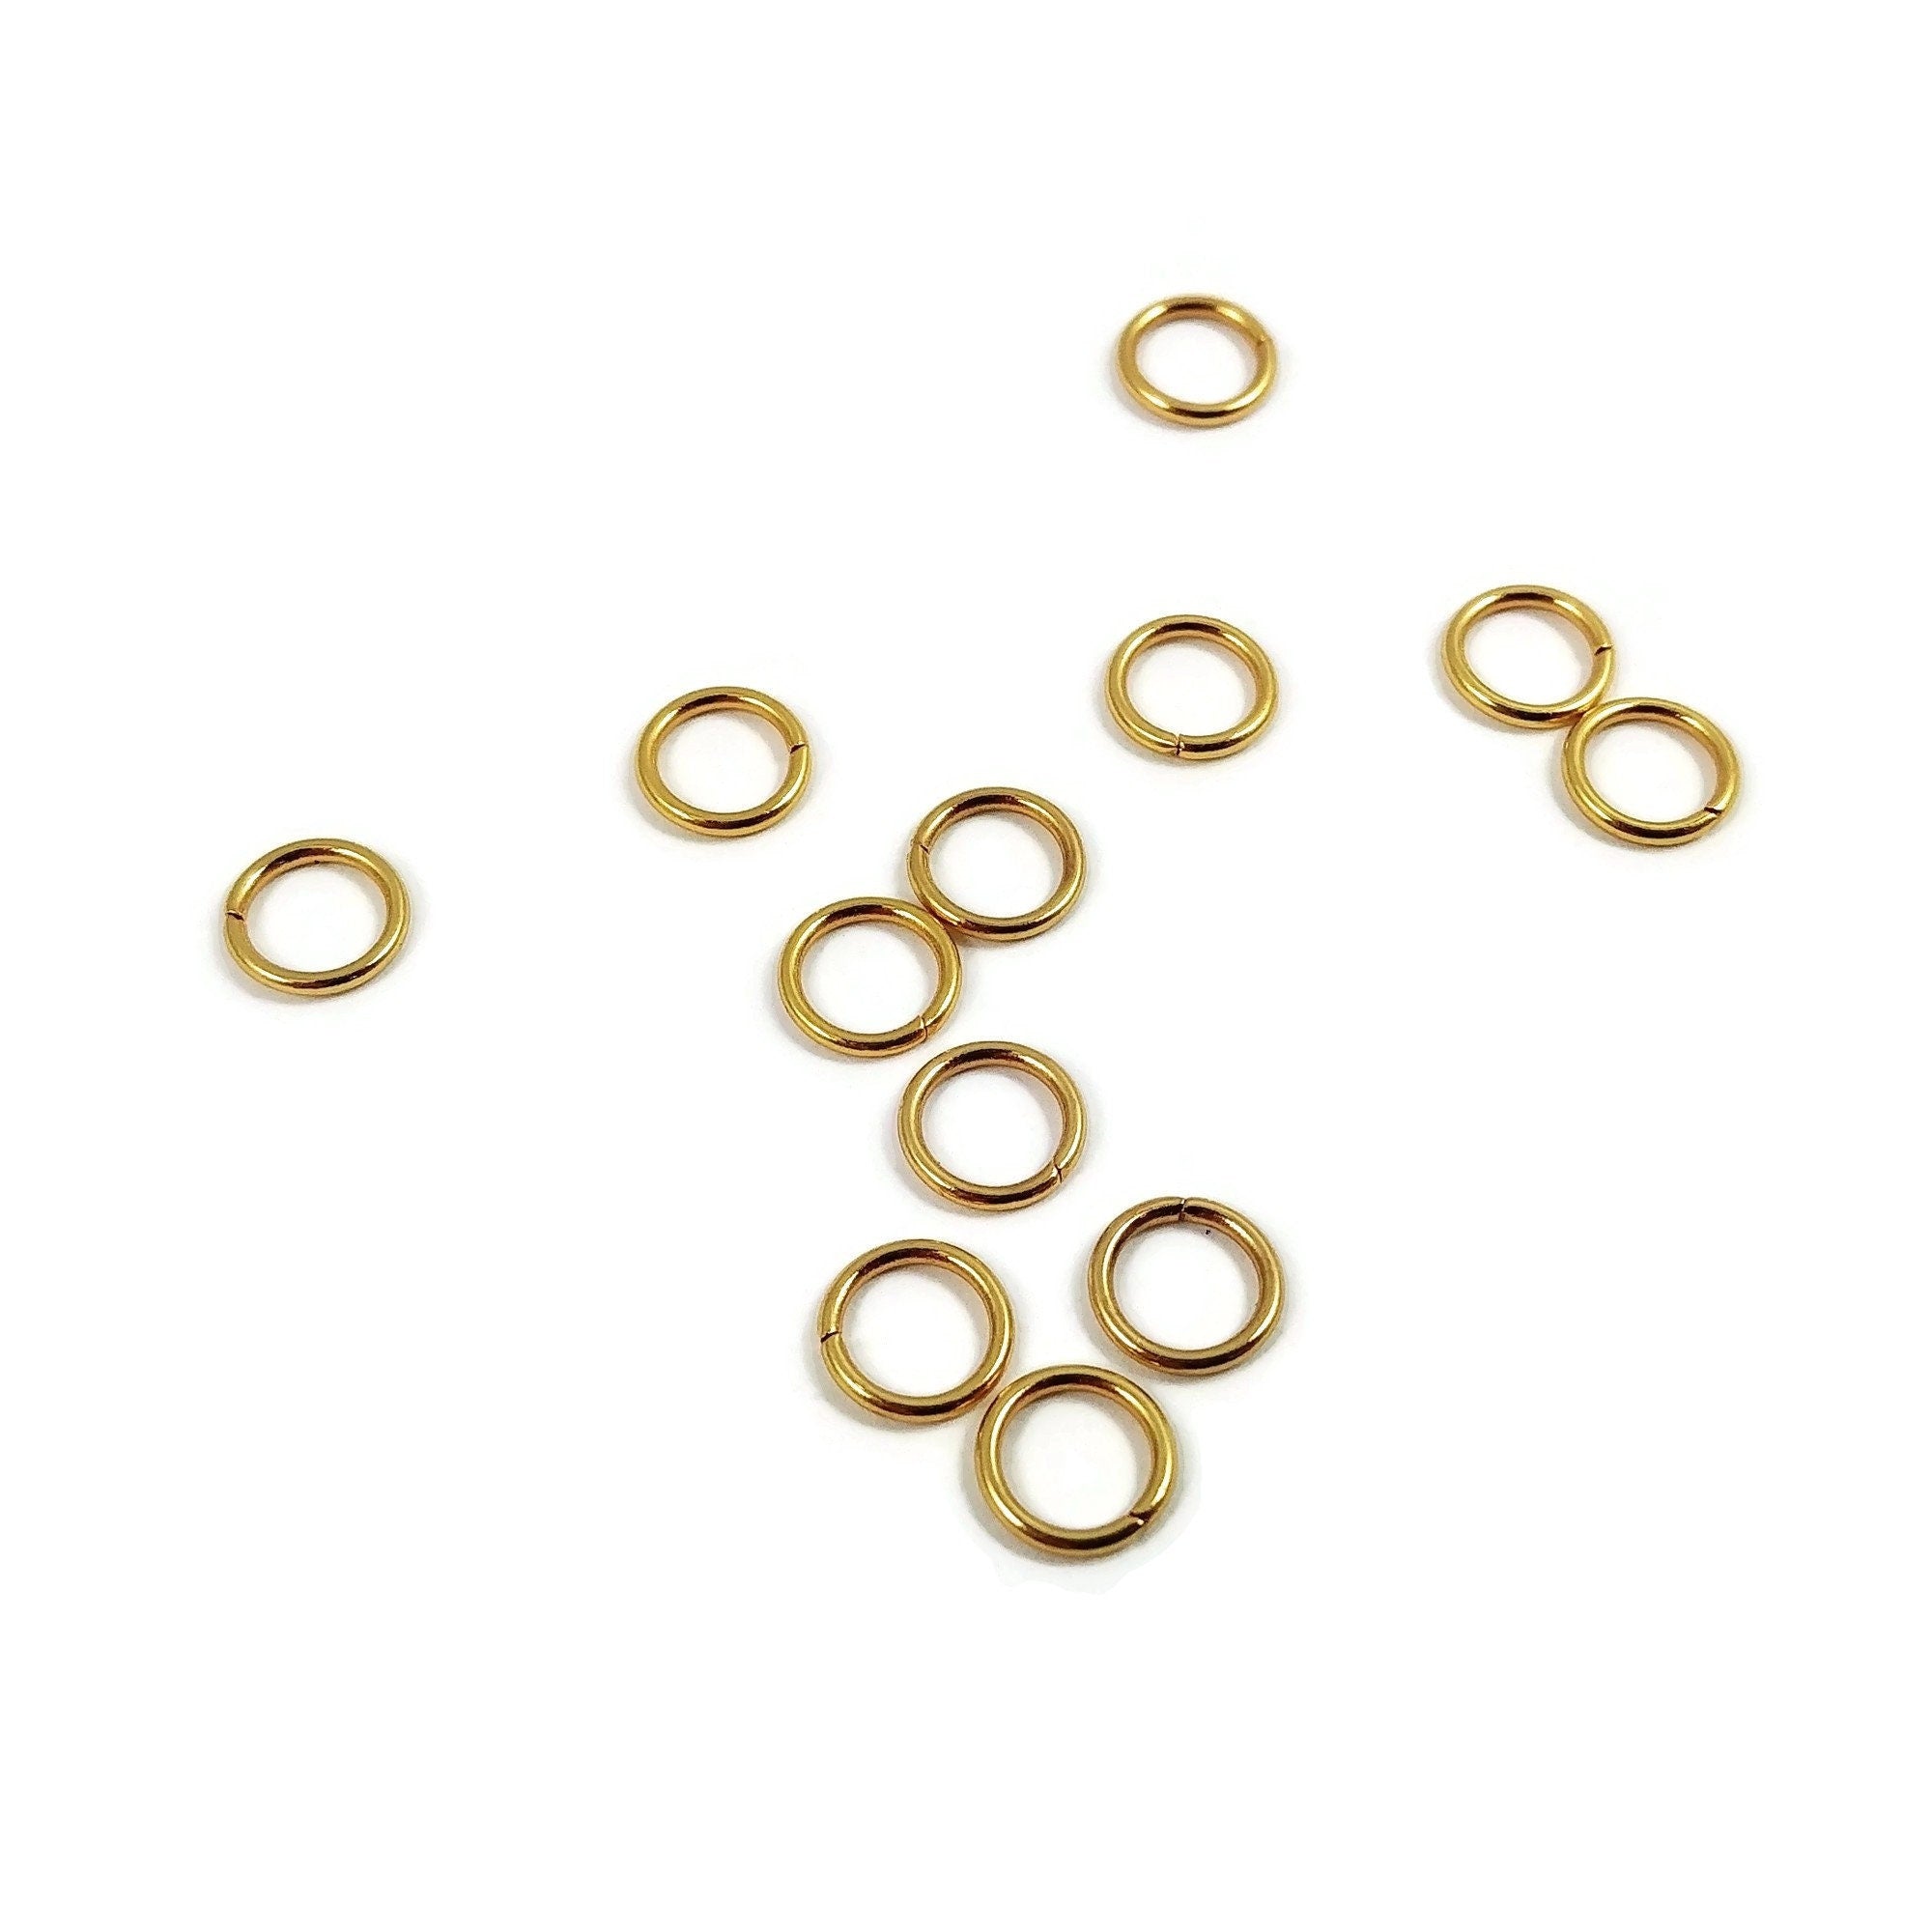 18K gold plated jump ring - 4mm, 5mm, 6mm or 8mm - 50pcs stainless steel jumprings - Jewelry making findings